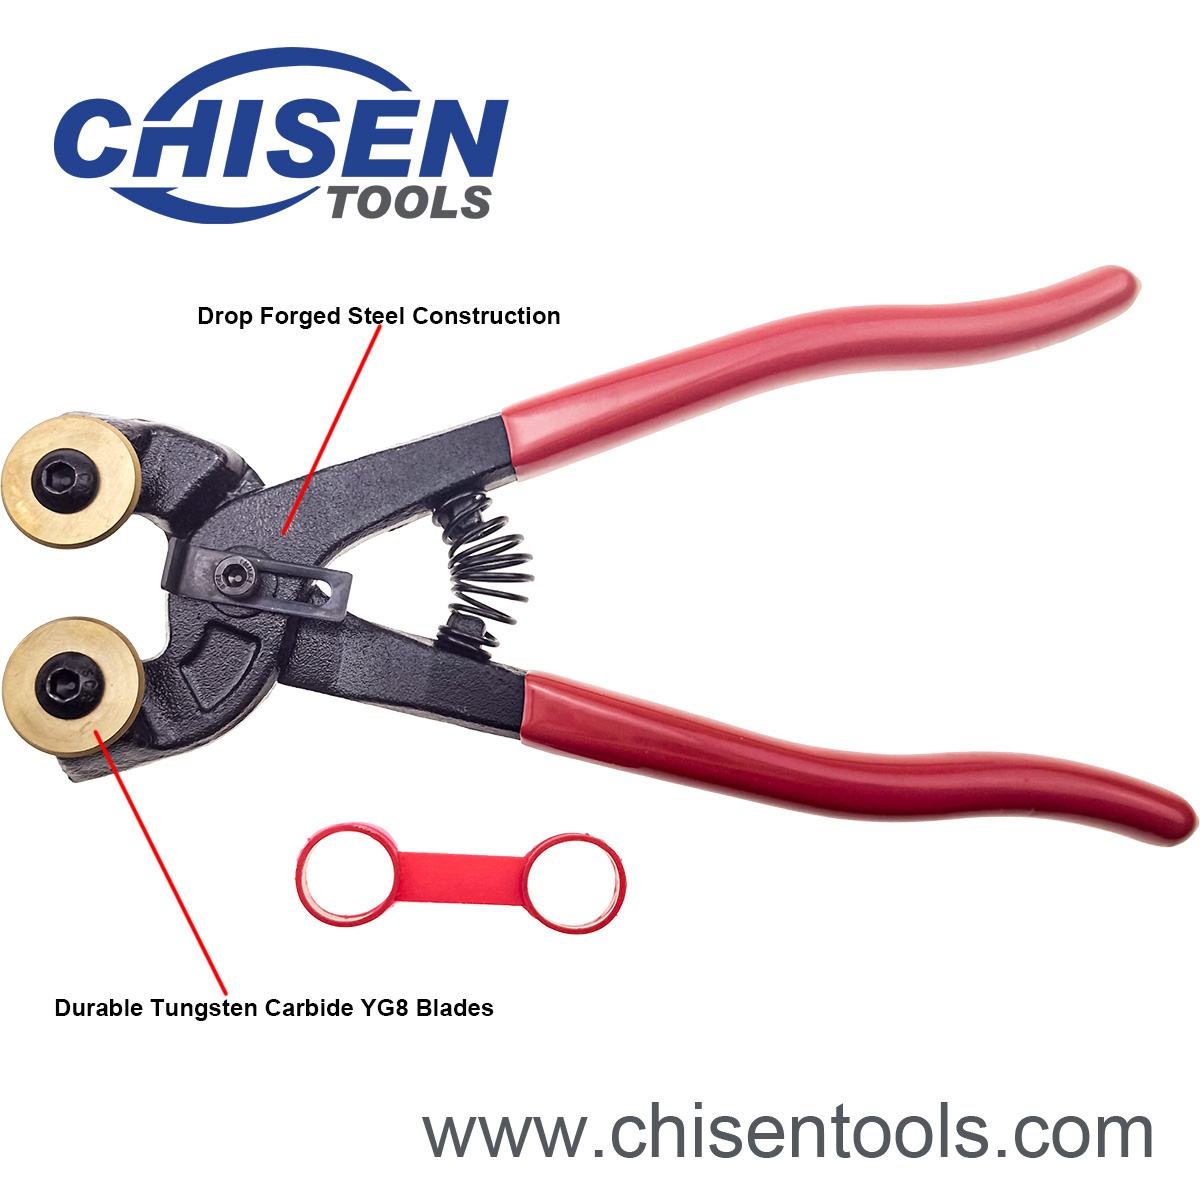 Glass Tile Nipper's Features